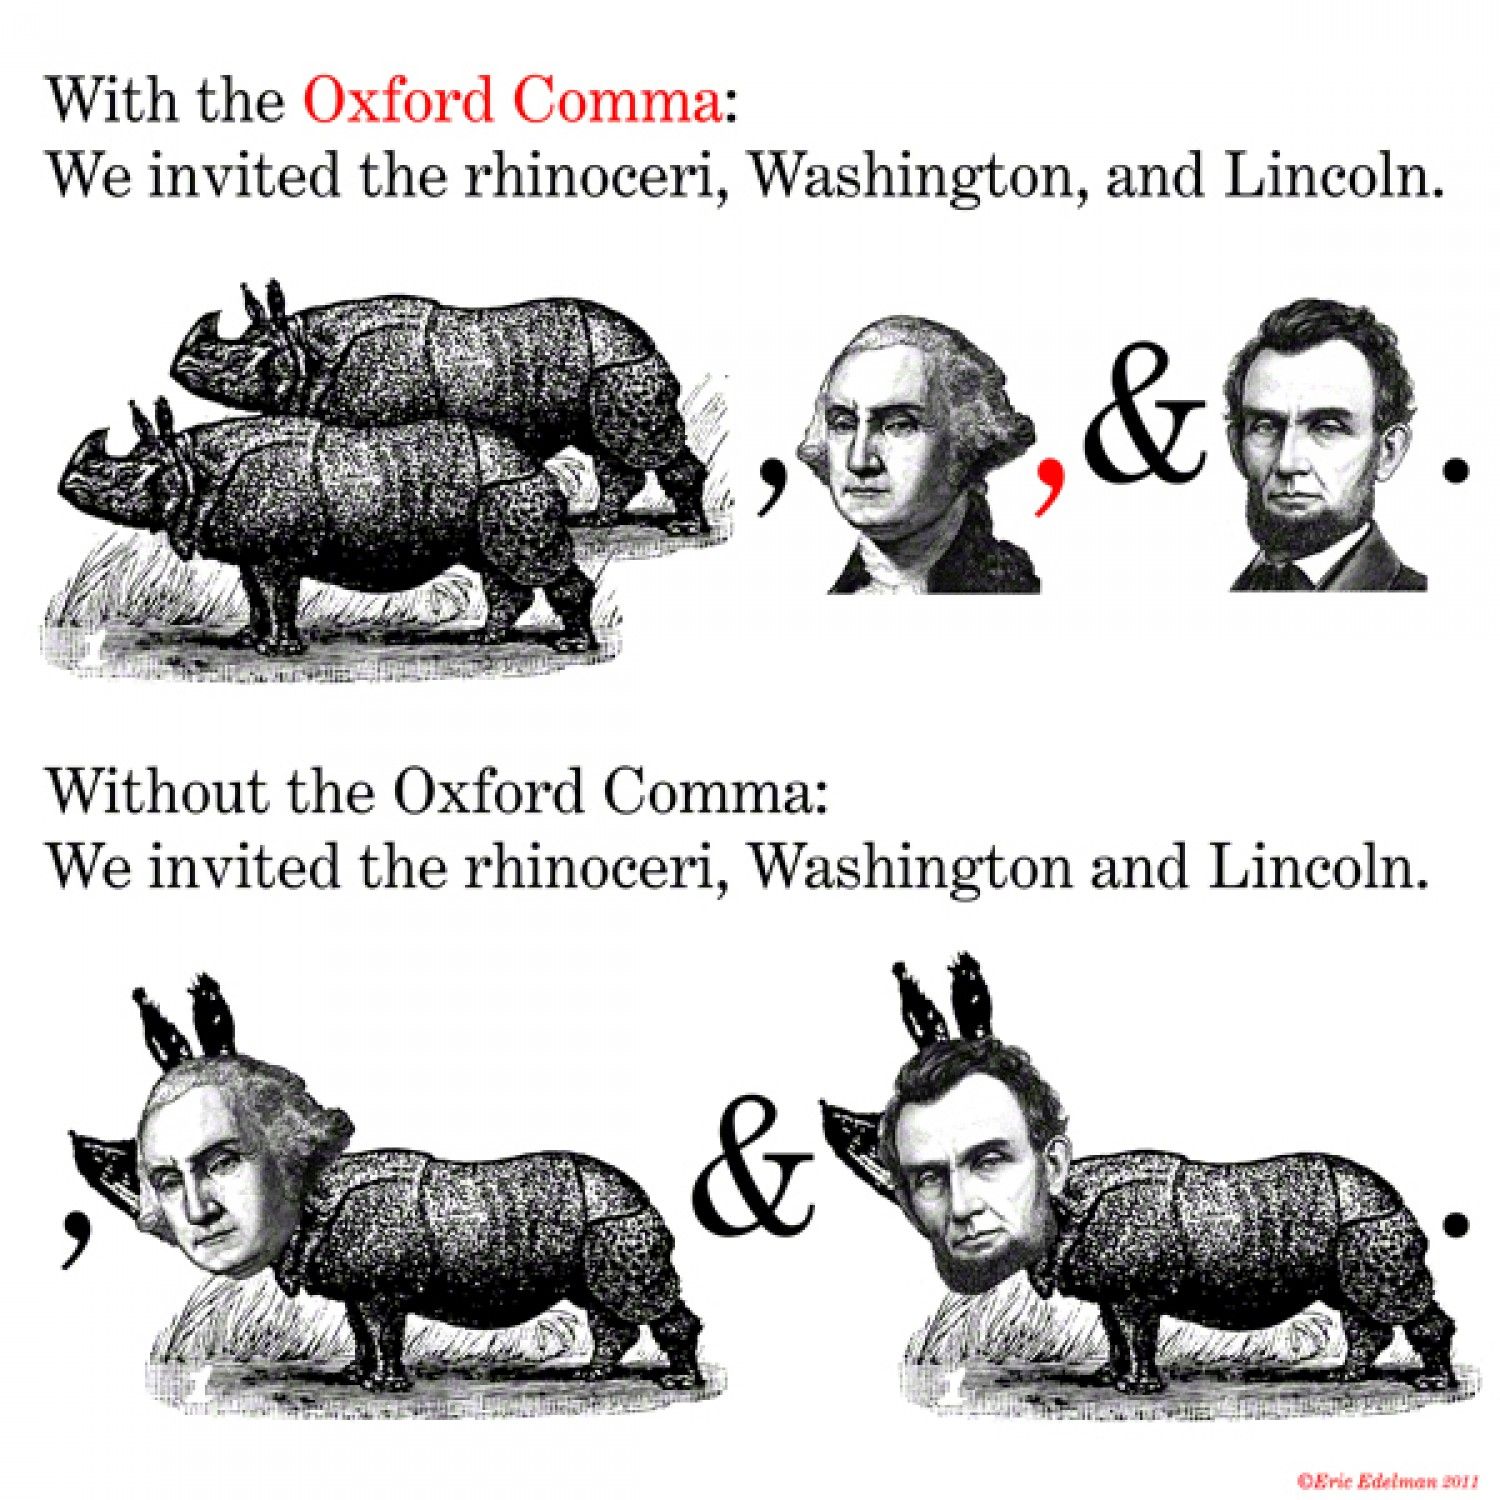 Work at home because of covid 19 and think more about oxford comma grammar. You want or don't want to use it?